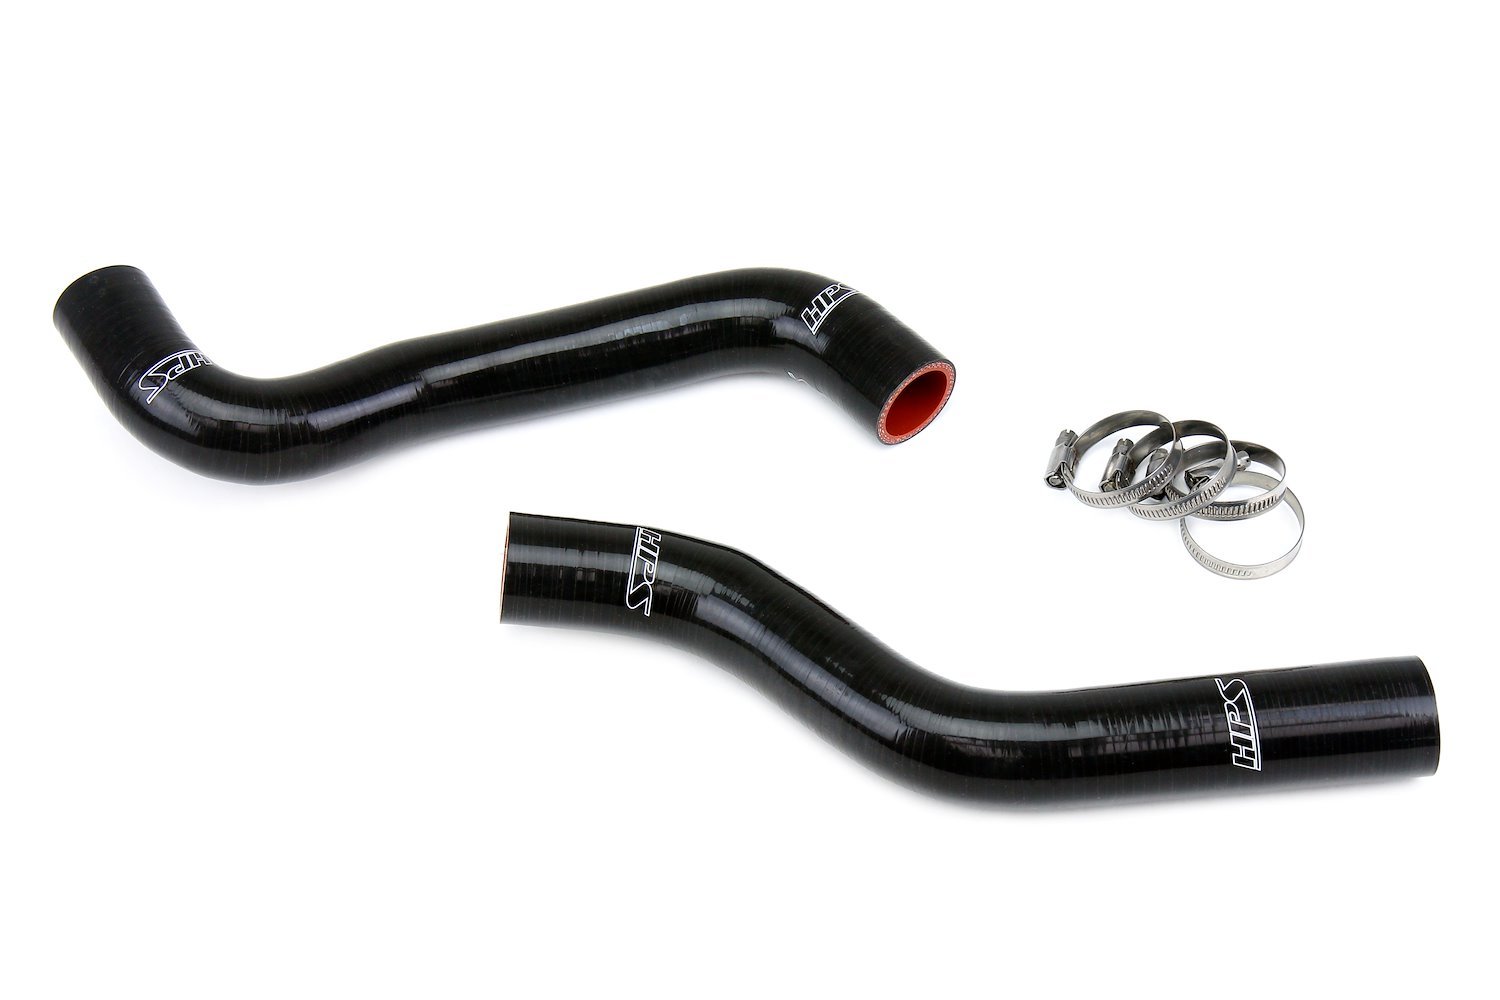 57-1887-BLK Radiator Hose Kit, 3-Ply Reinforced Silicone, Replaces Rubber Radiator Hoses